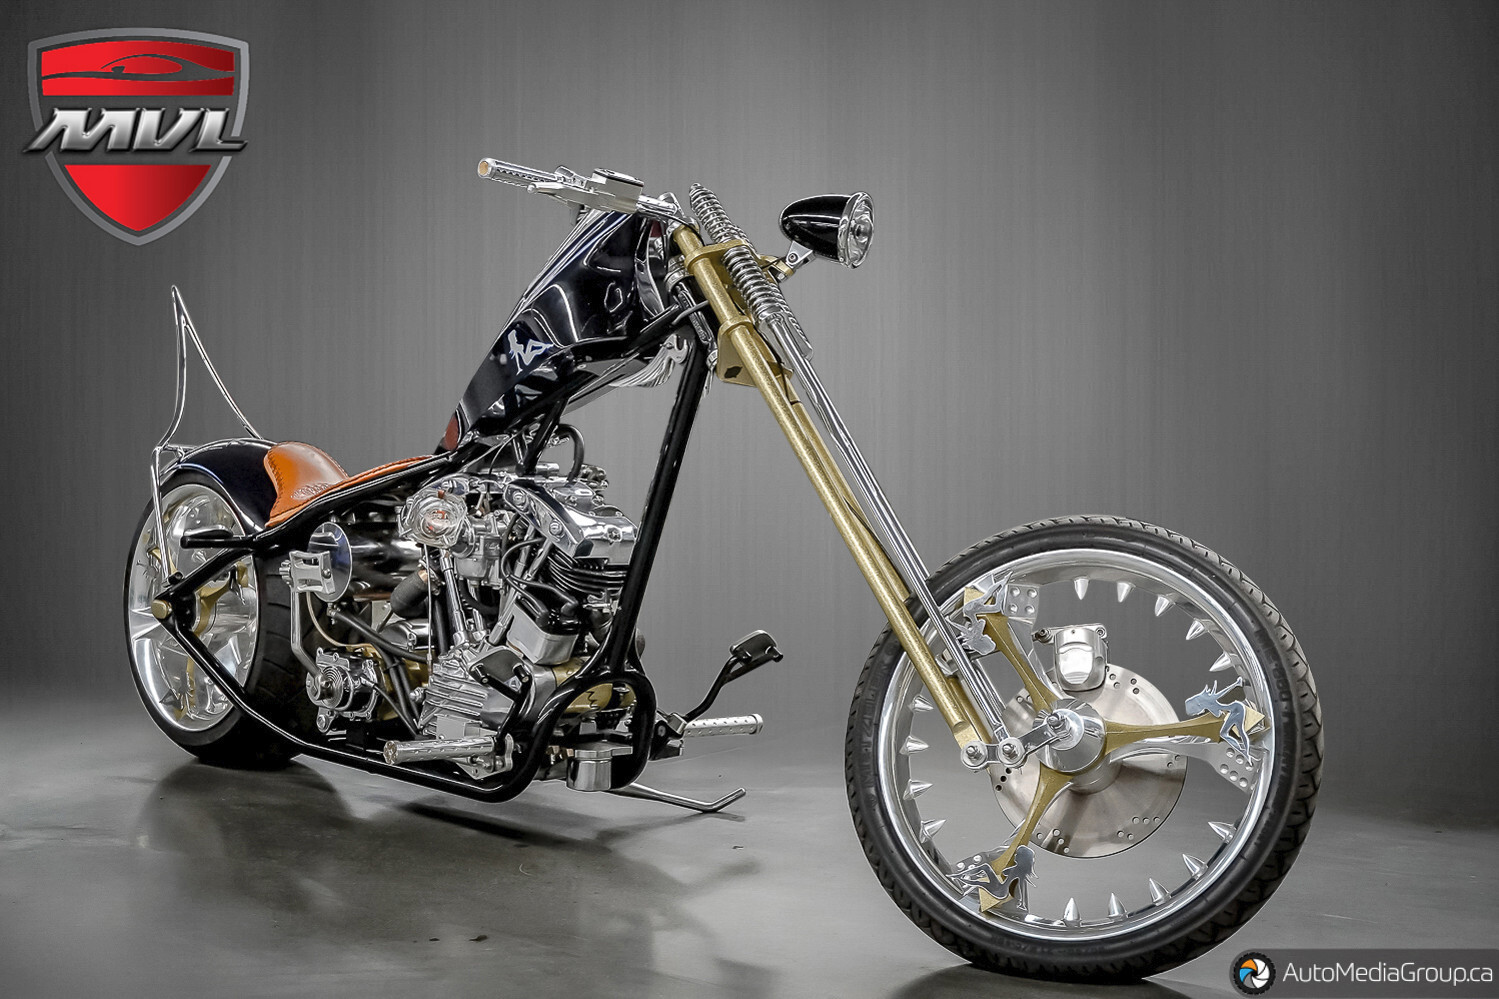 2003 Custom Motorcycle Hand built by Billy Lane of Choppers Inc